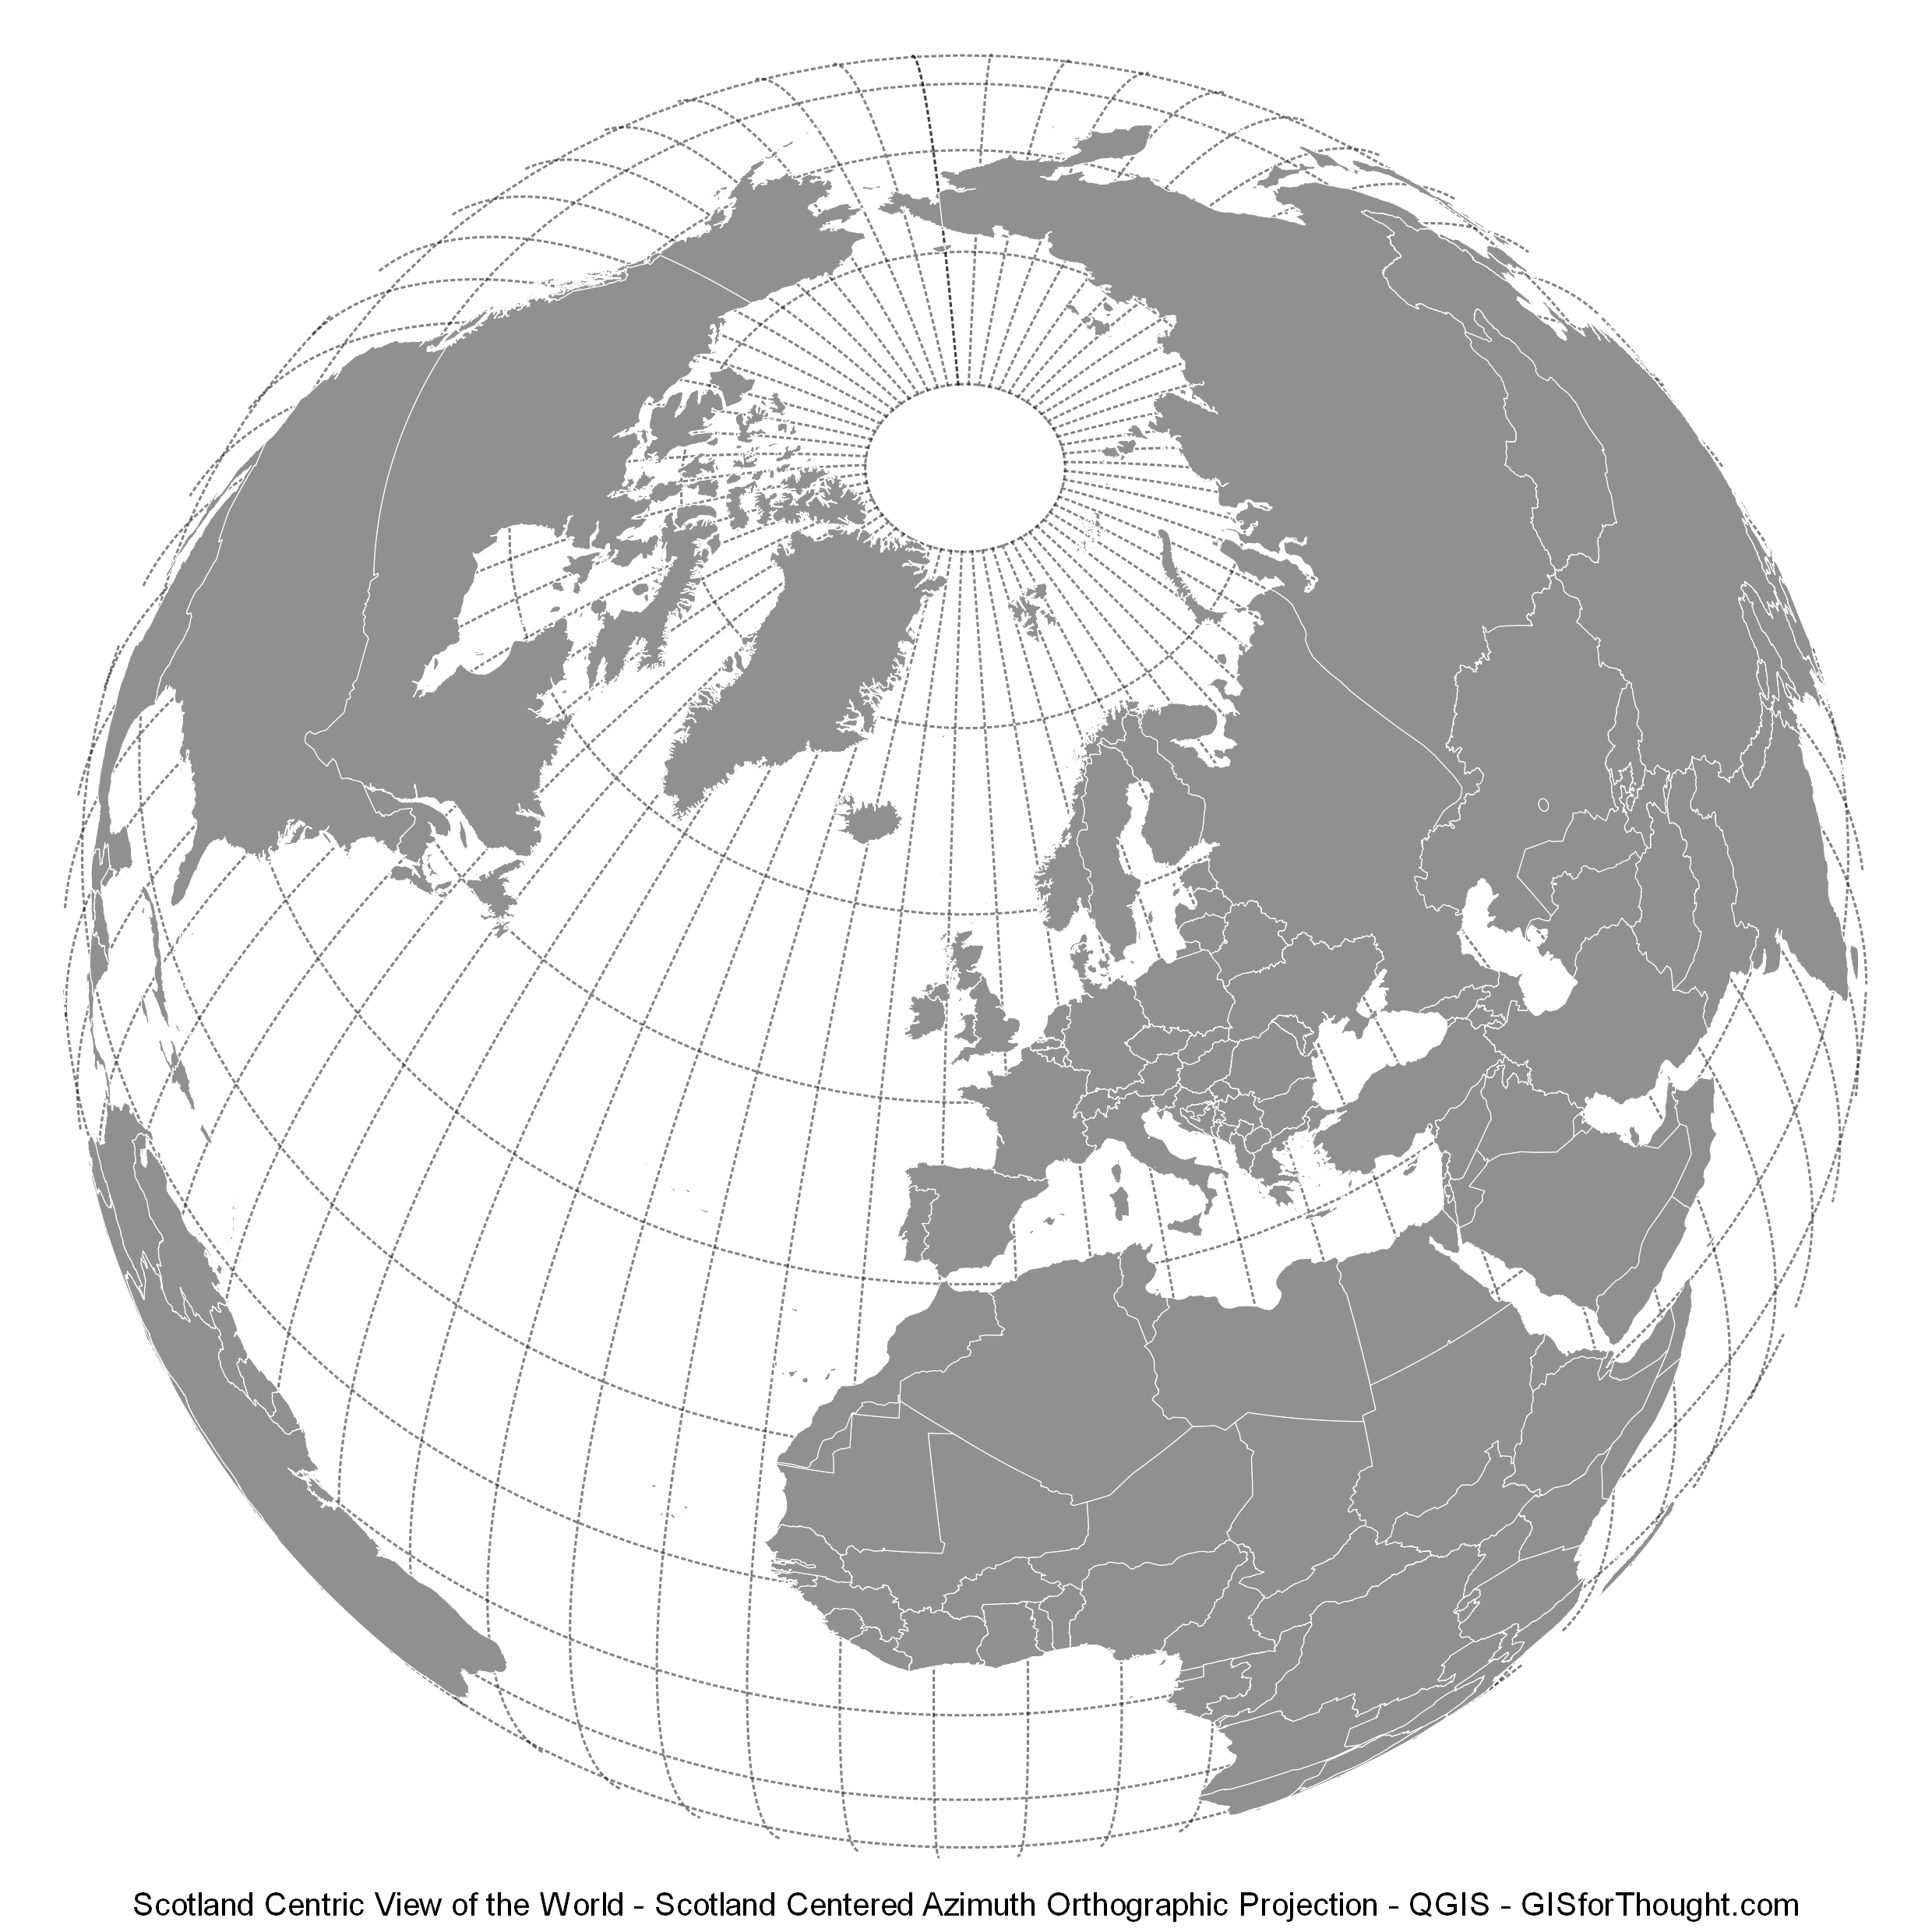 QGIS Azimuth Orthographic Projections